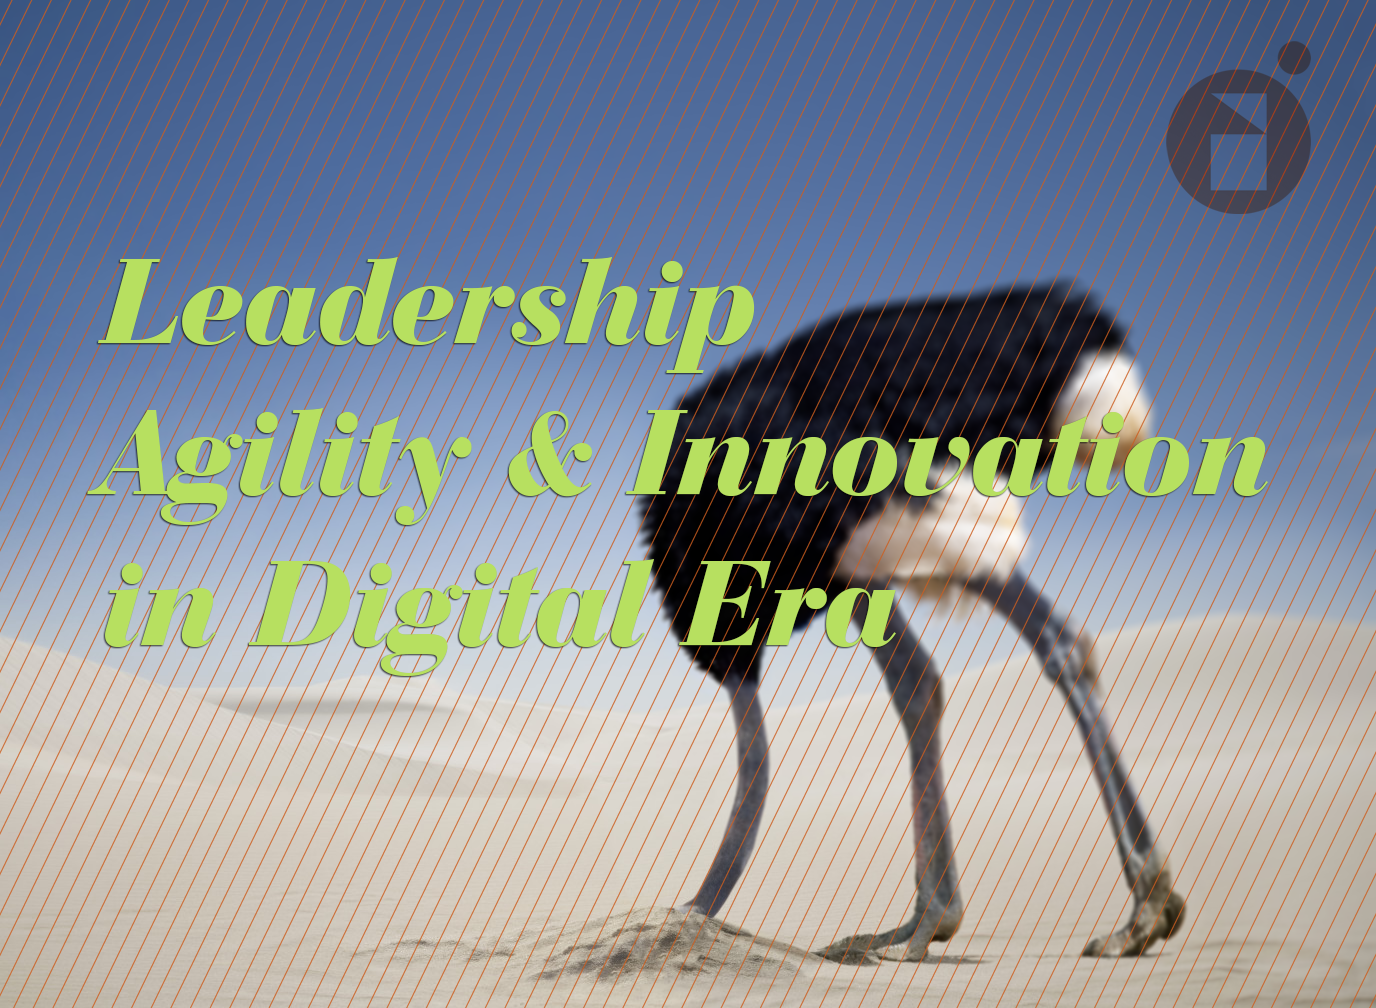 leadership agility and innovation in digital era by Justin Tsui